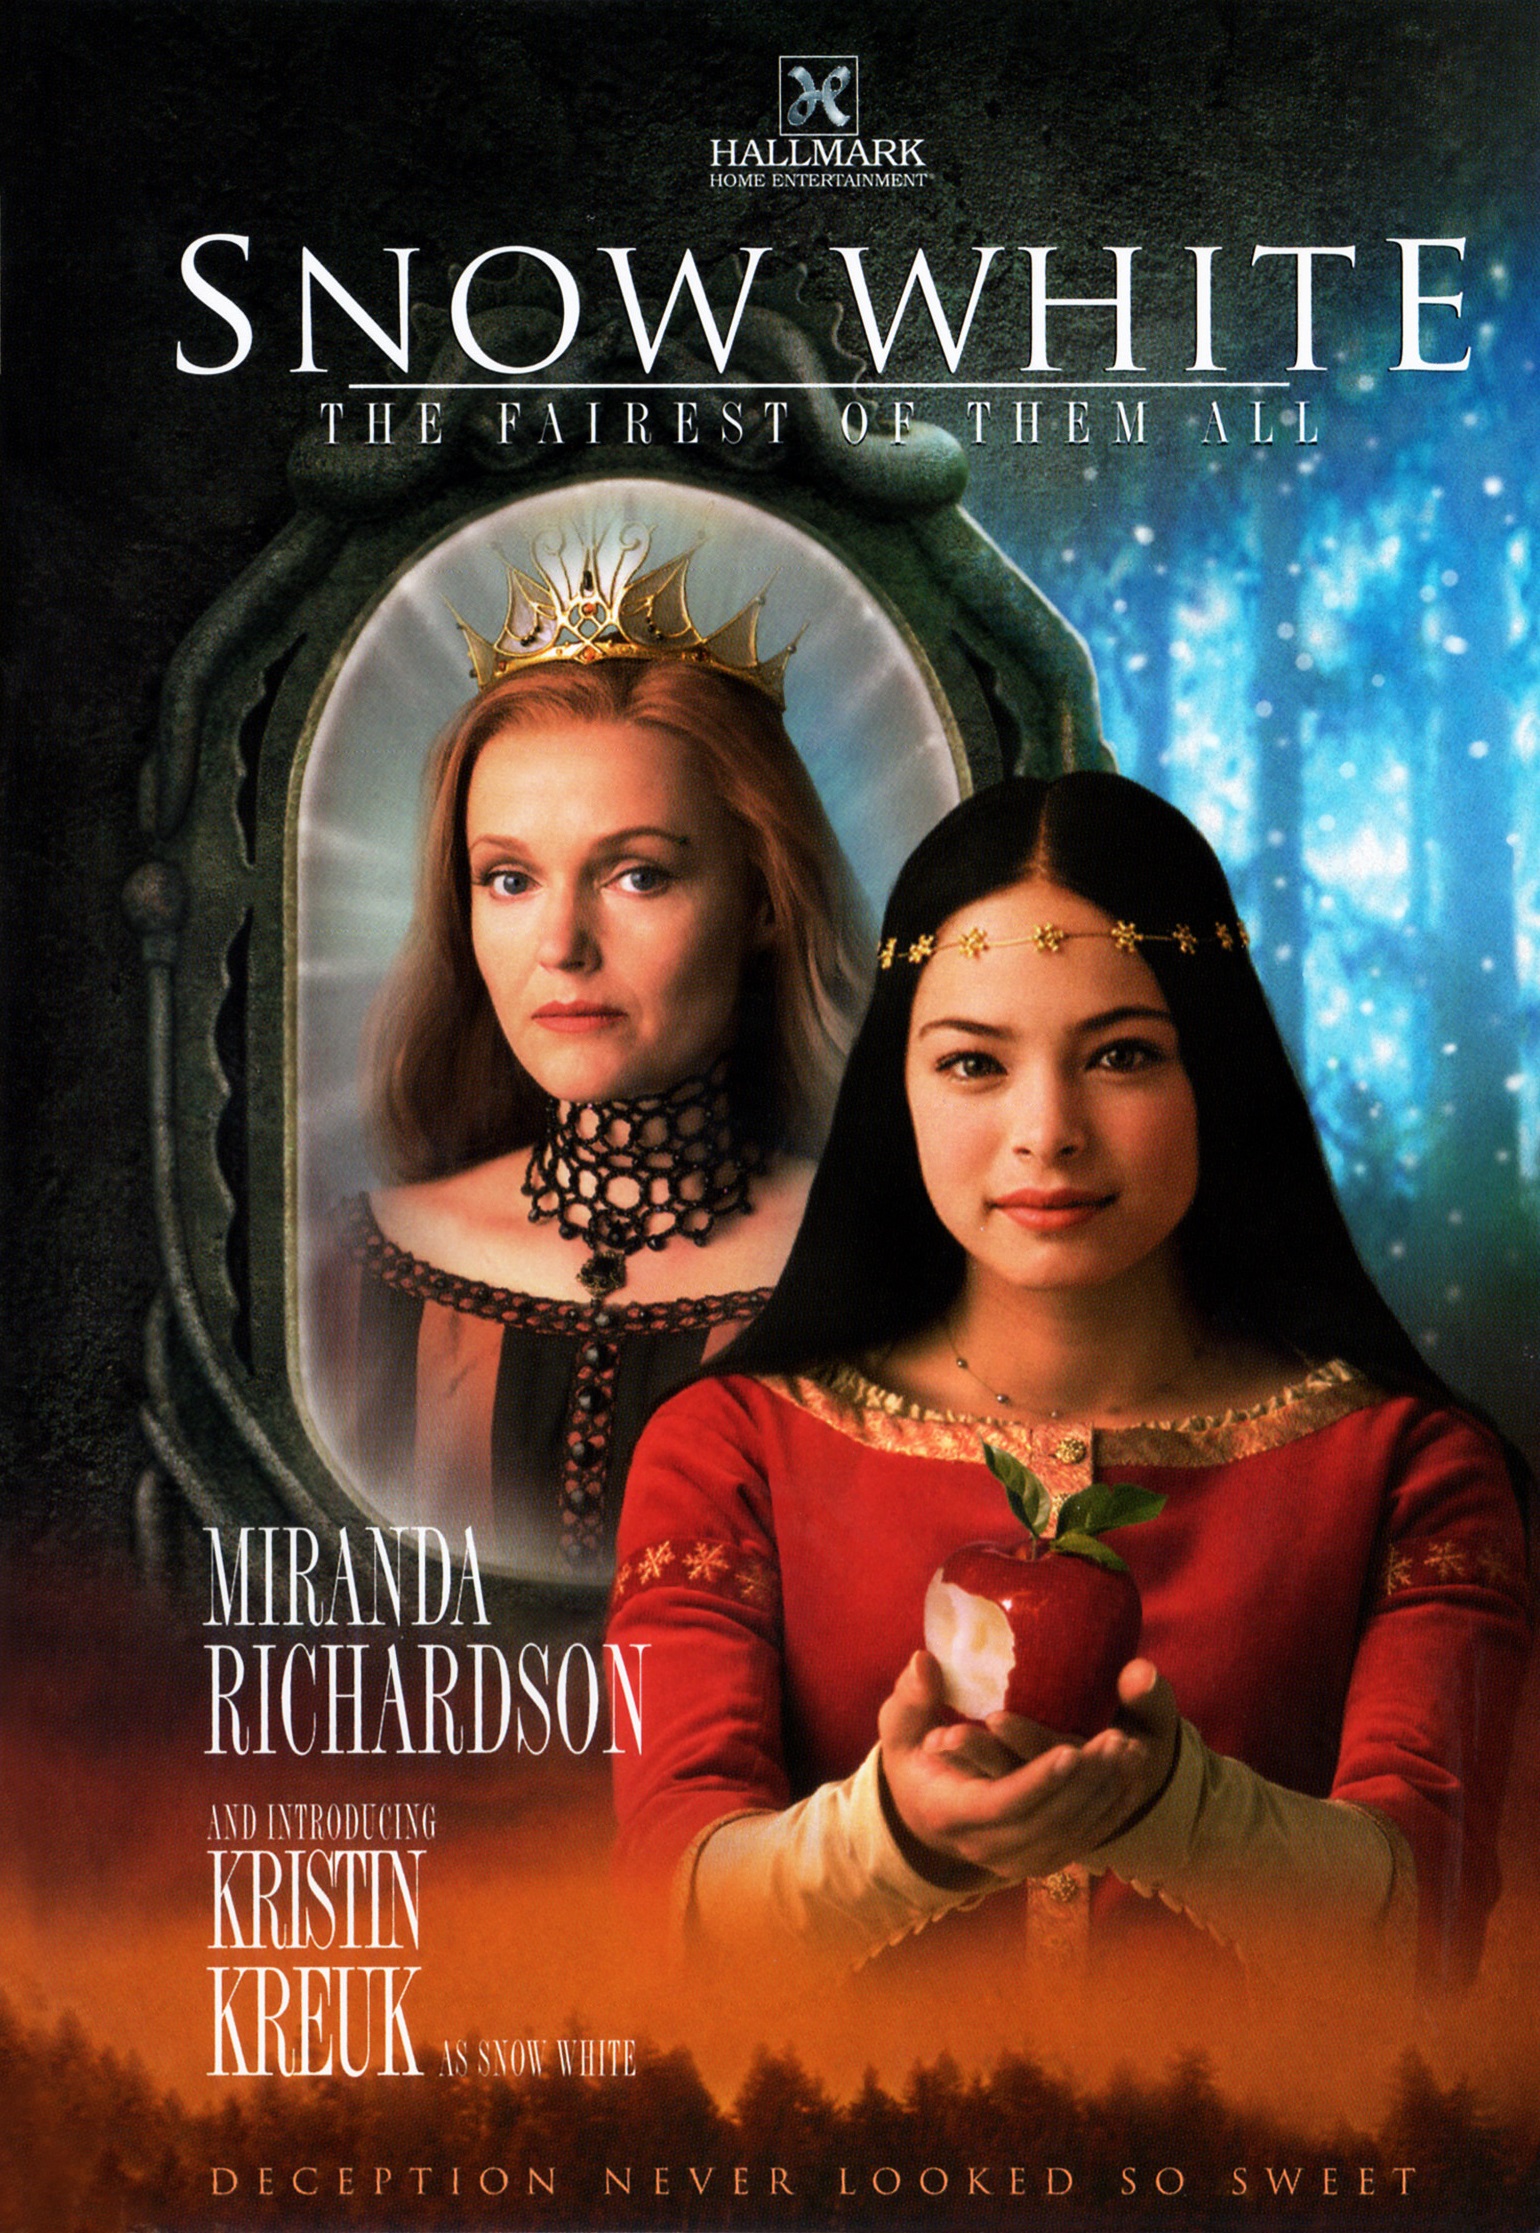 abdullah hayat khan recommends Snow White Movie Download